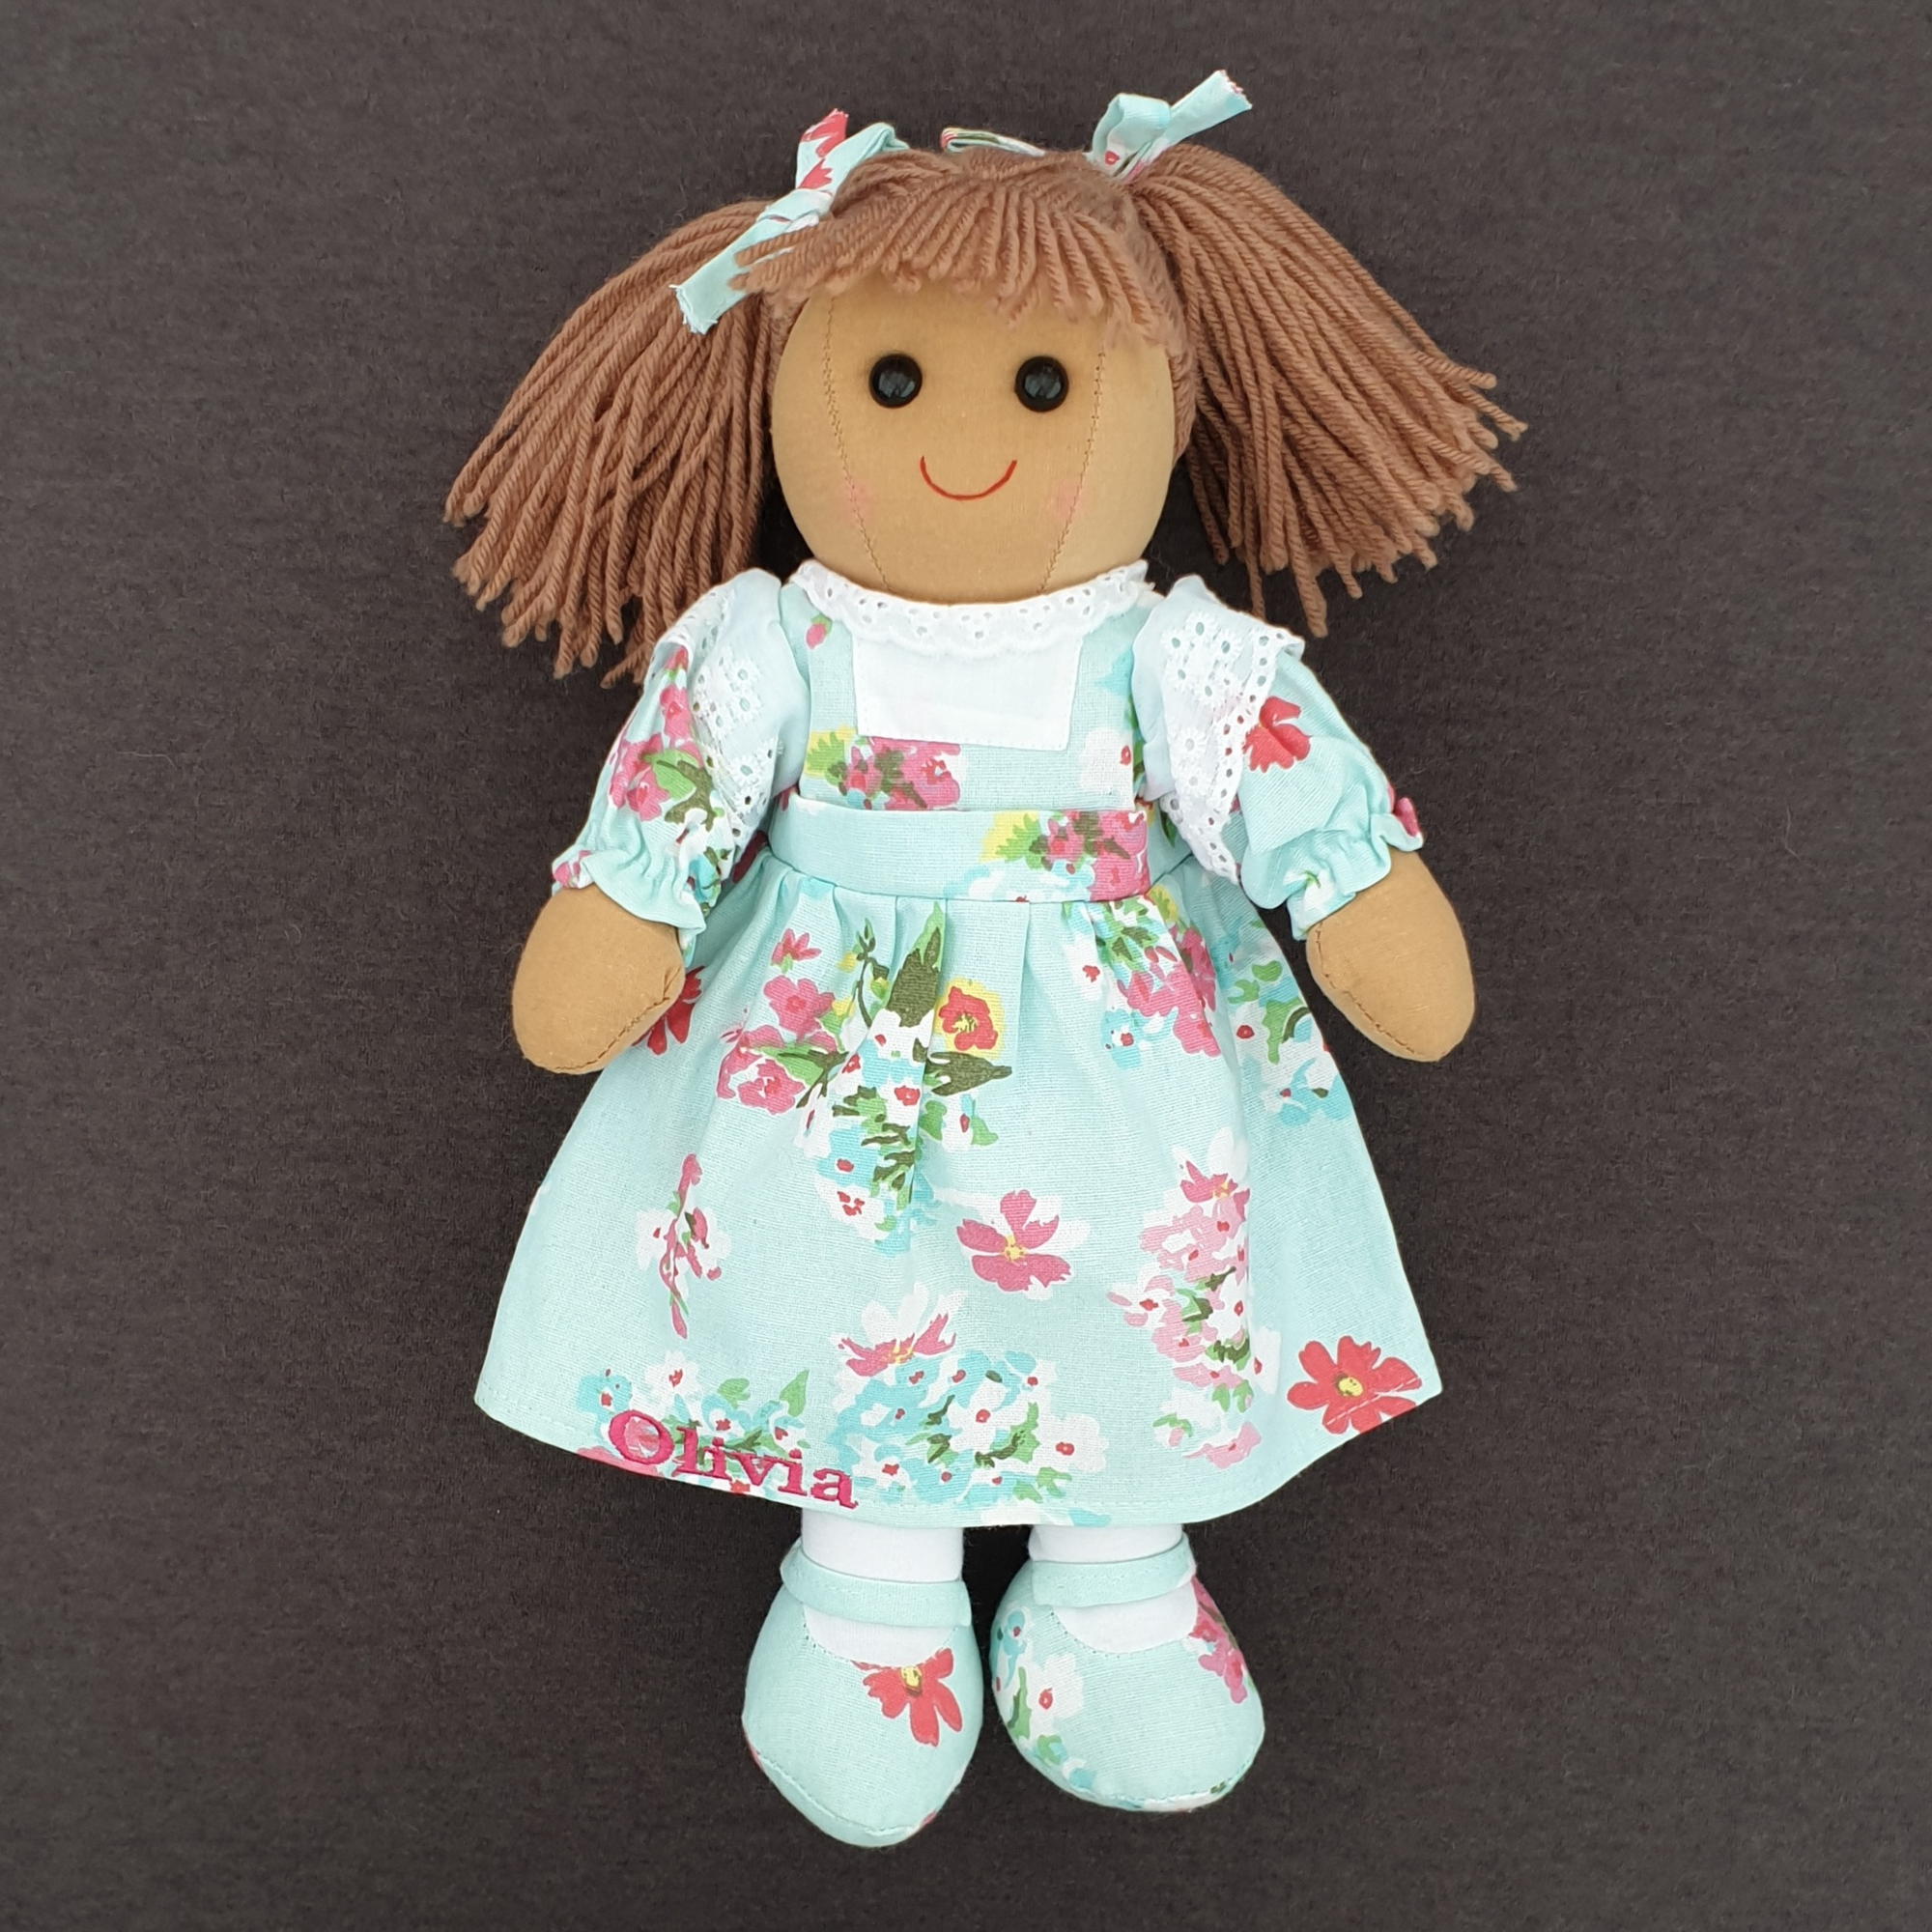 Personalised rag doll wearing a blue floral dress that can be personalised with a name of up to 10 characters. Underneath her dress she is wearing white pantaloons.